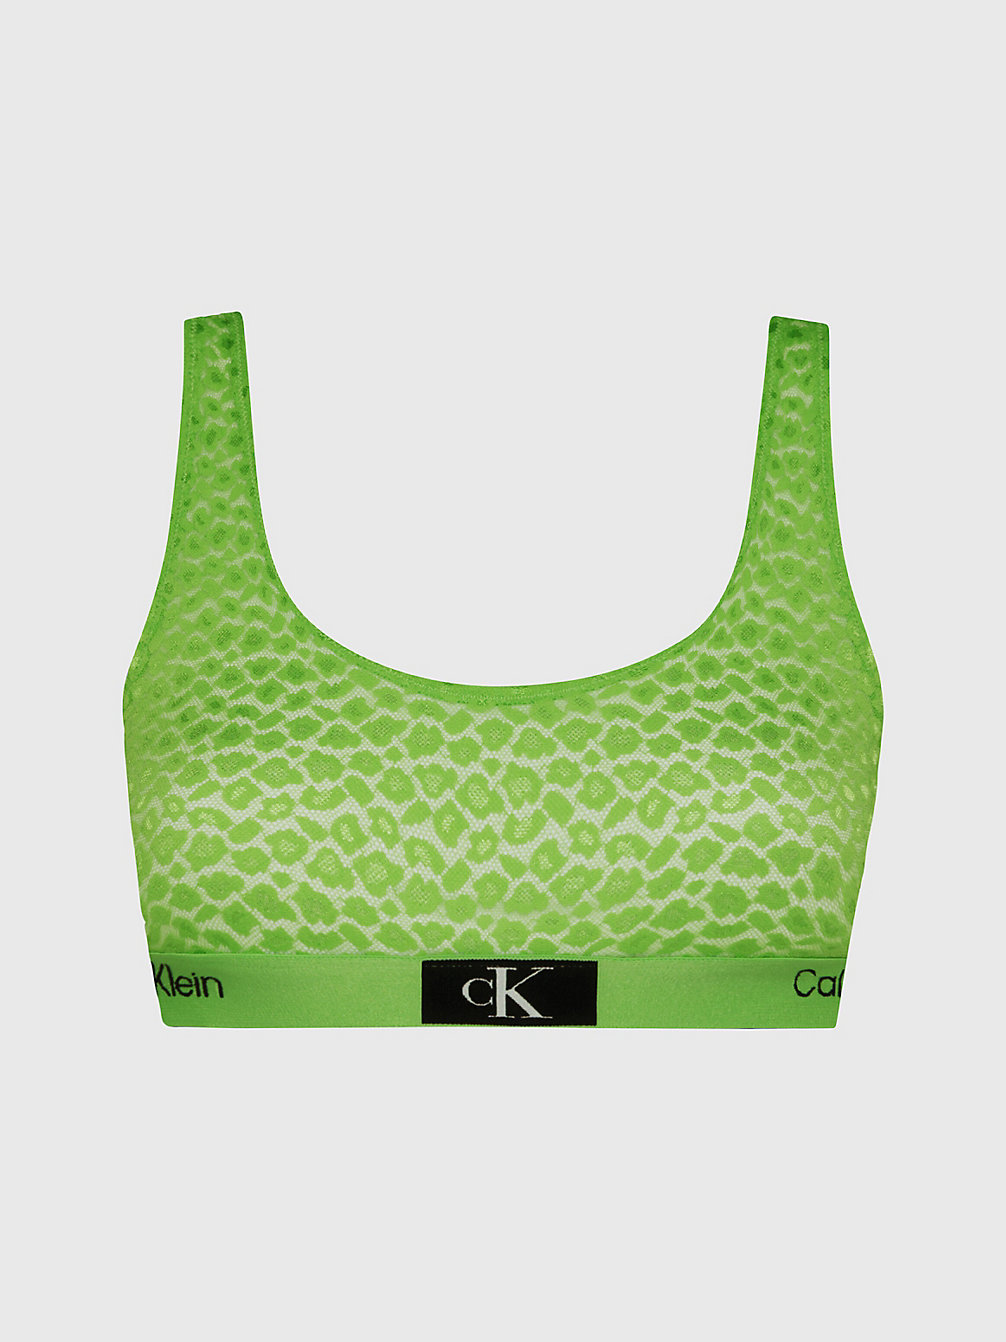 Brassière In Pizzo - Ck96 > FABULOUS GREEN > undefined donna > Calvin Klein